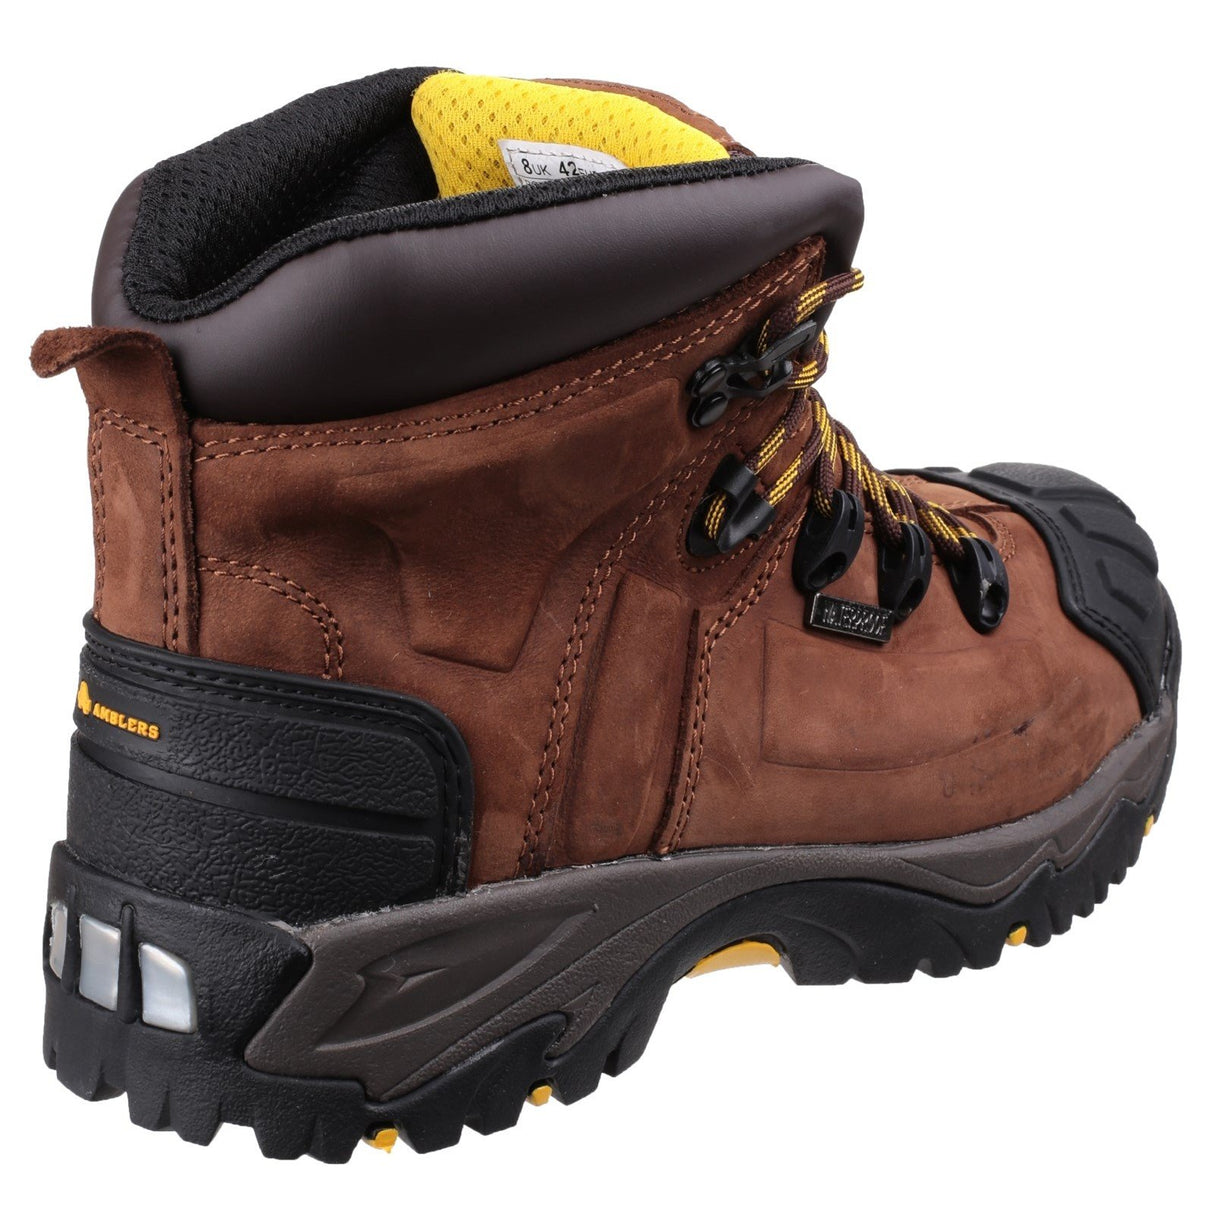 Amblers Safety Waterproof Lace Up Safety Boot